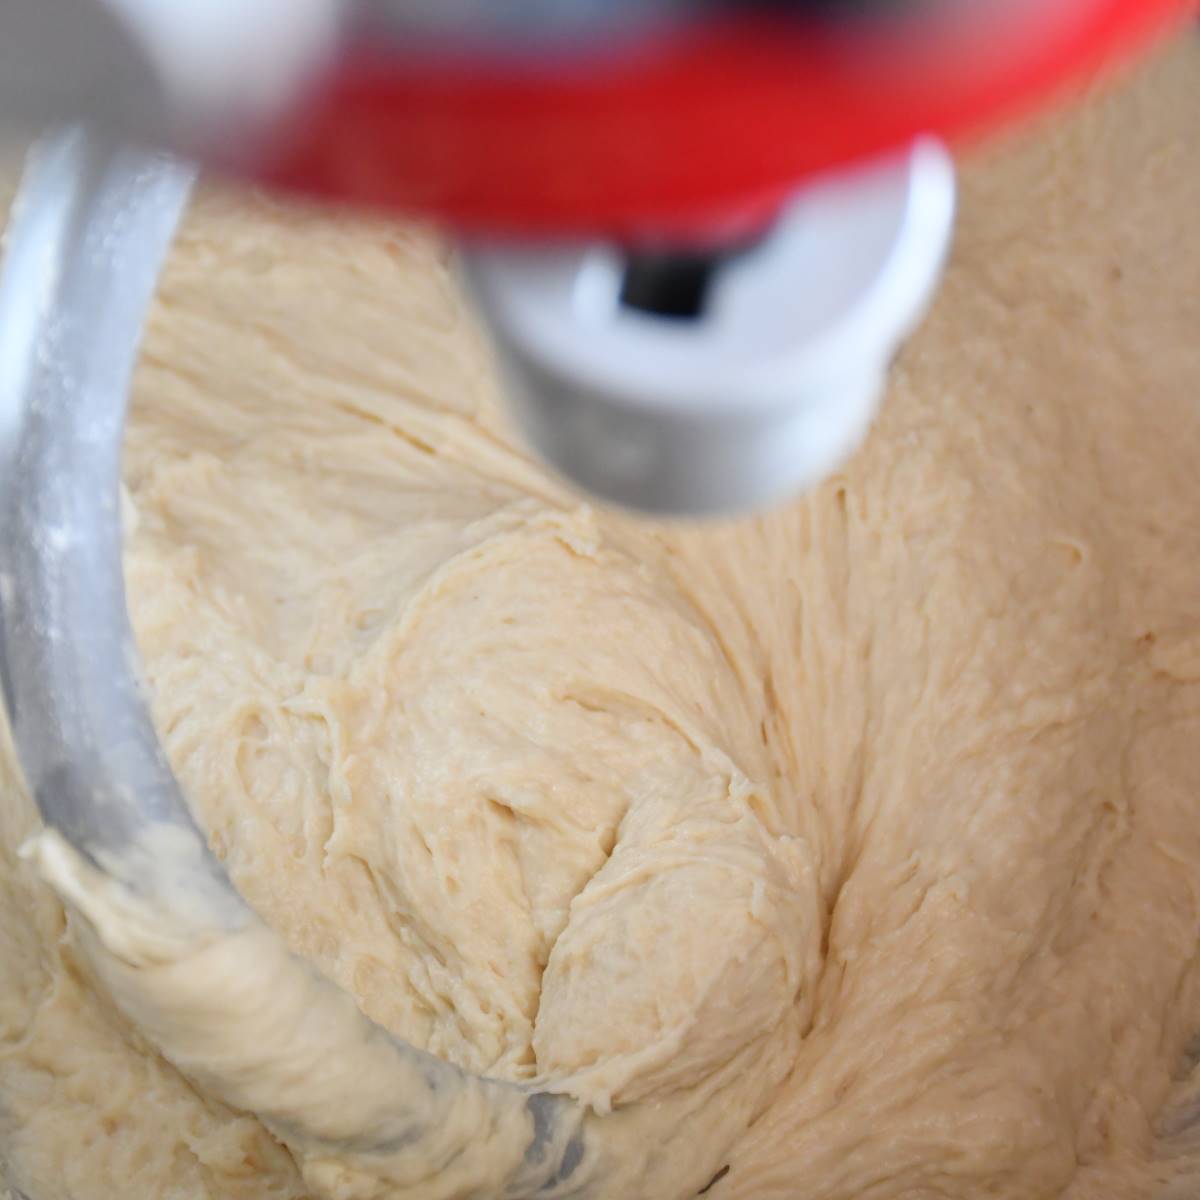 Mixer equipped with a dough hook to knead the dough.